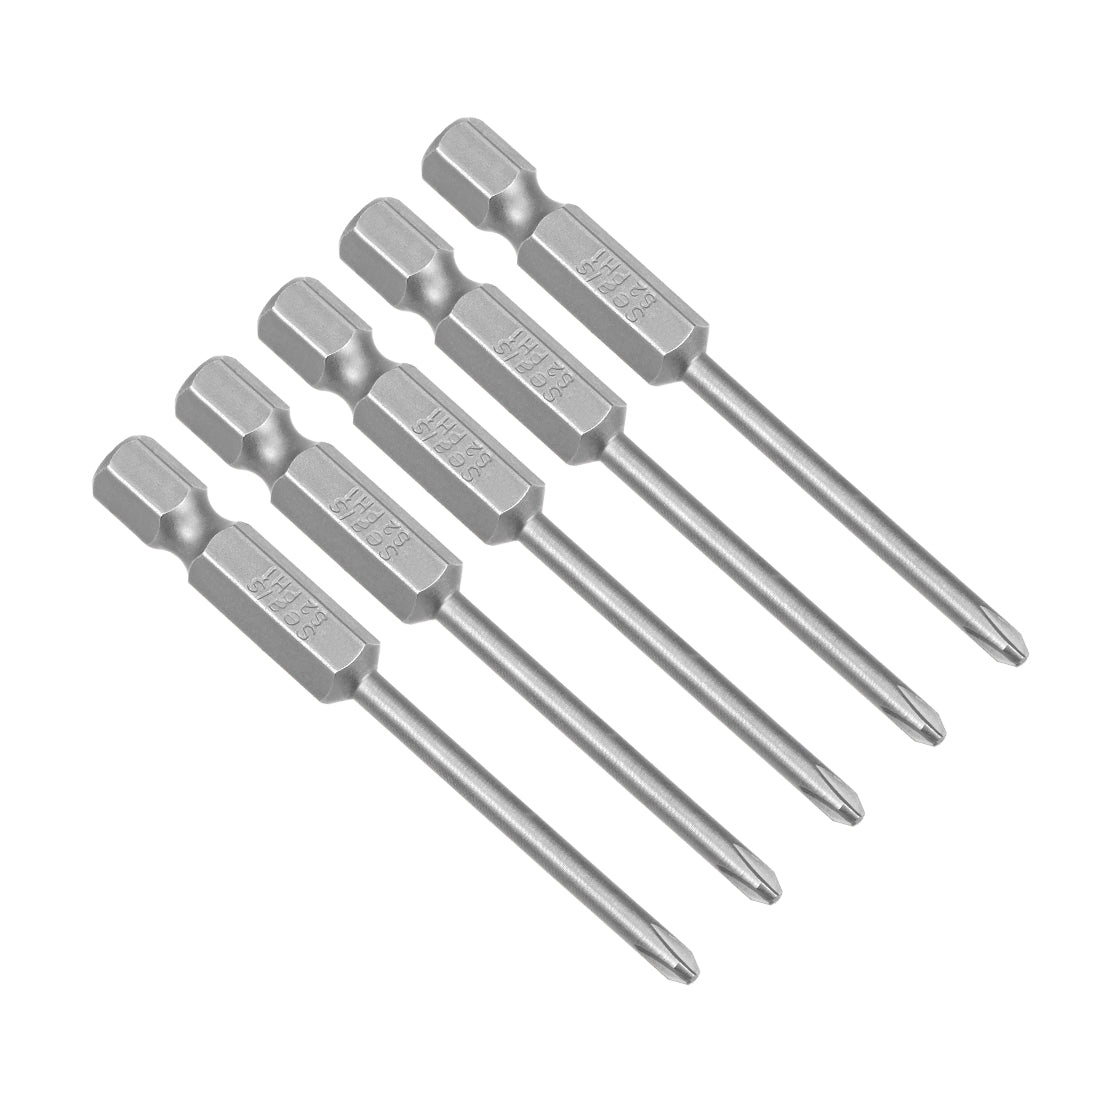 uxcell Uxcell 5 Pcs Magnetic Phillips Screwdriver Bits, Hex Shank S2 Power Tools